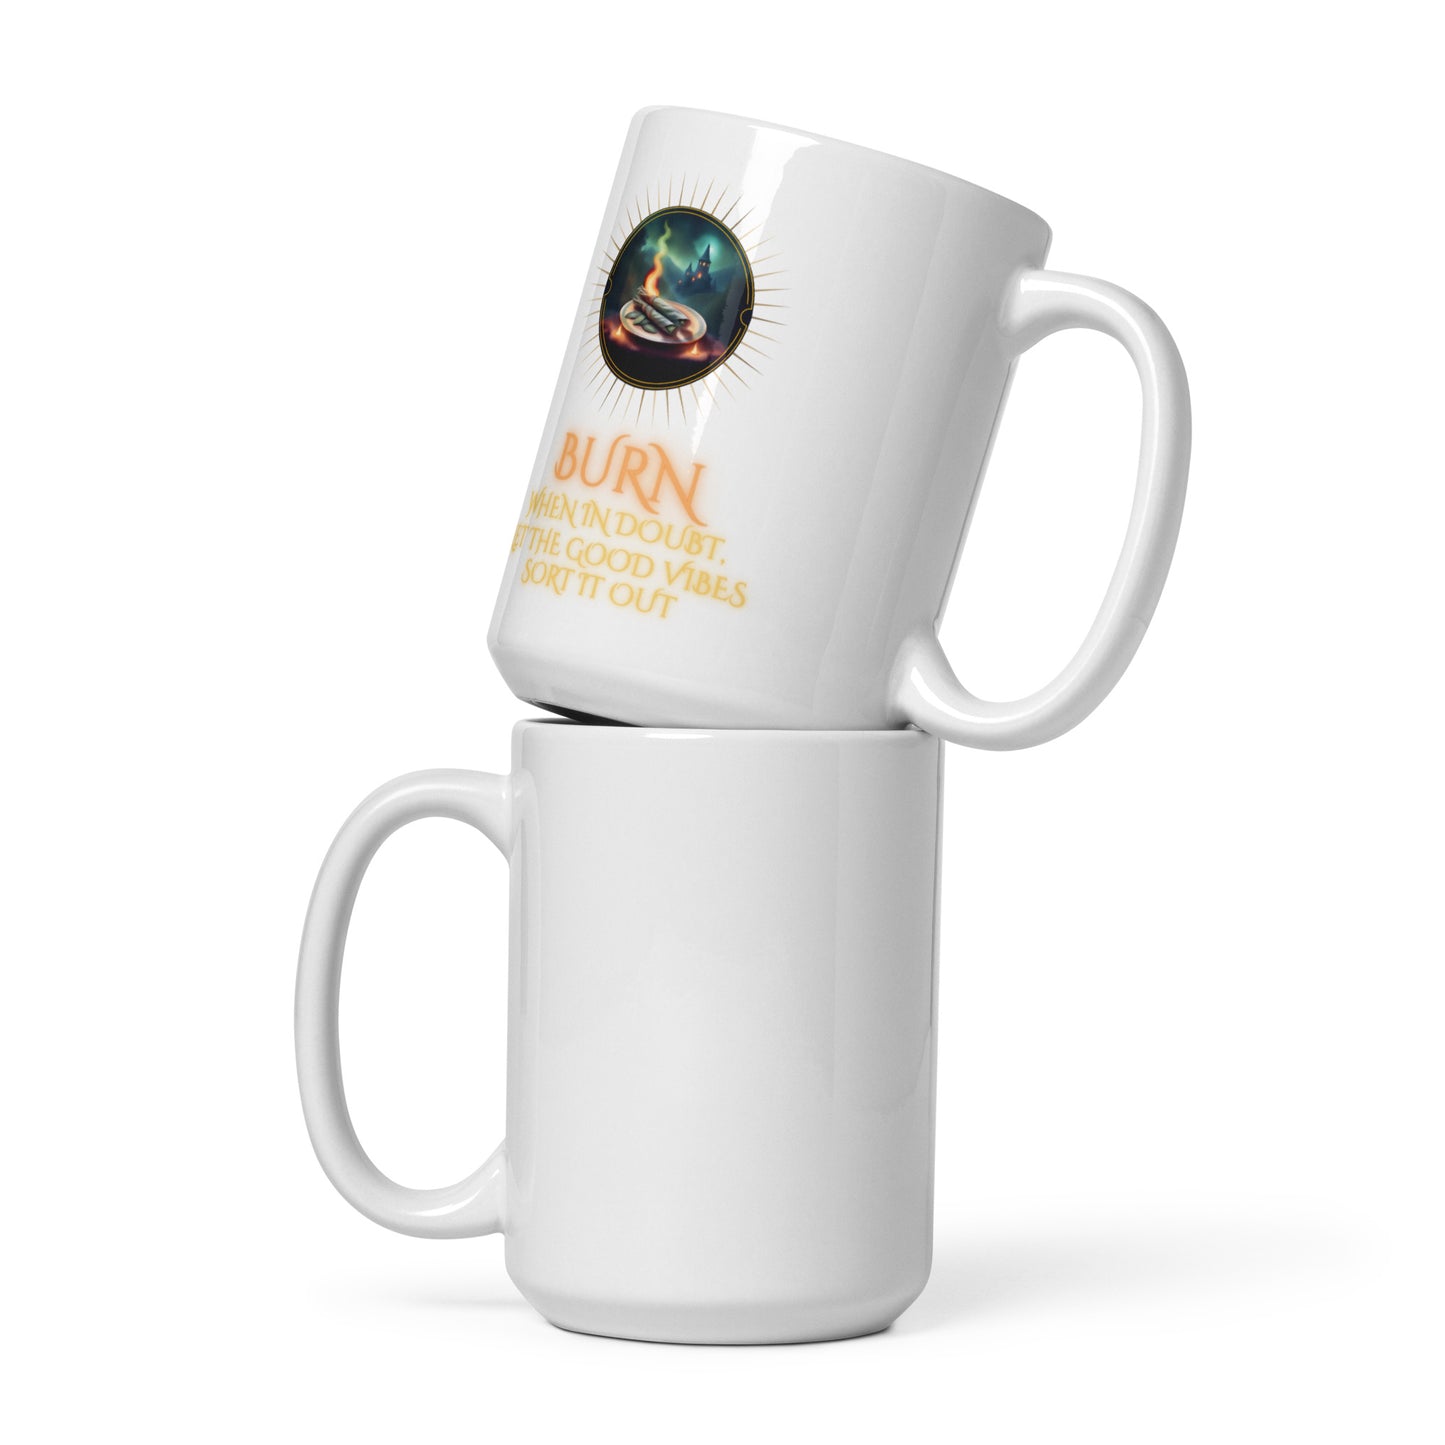 Burn When In Doubt Let The Good Vibes Sort It Out White glossy mug